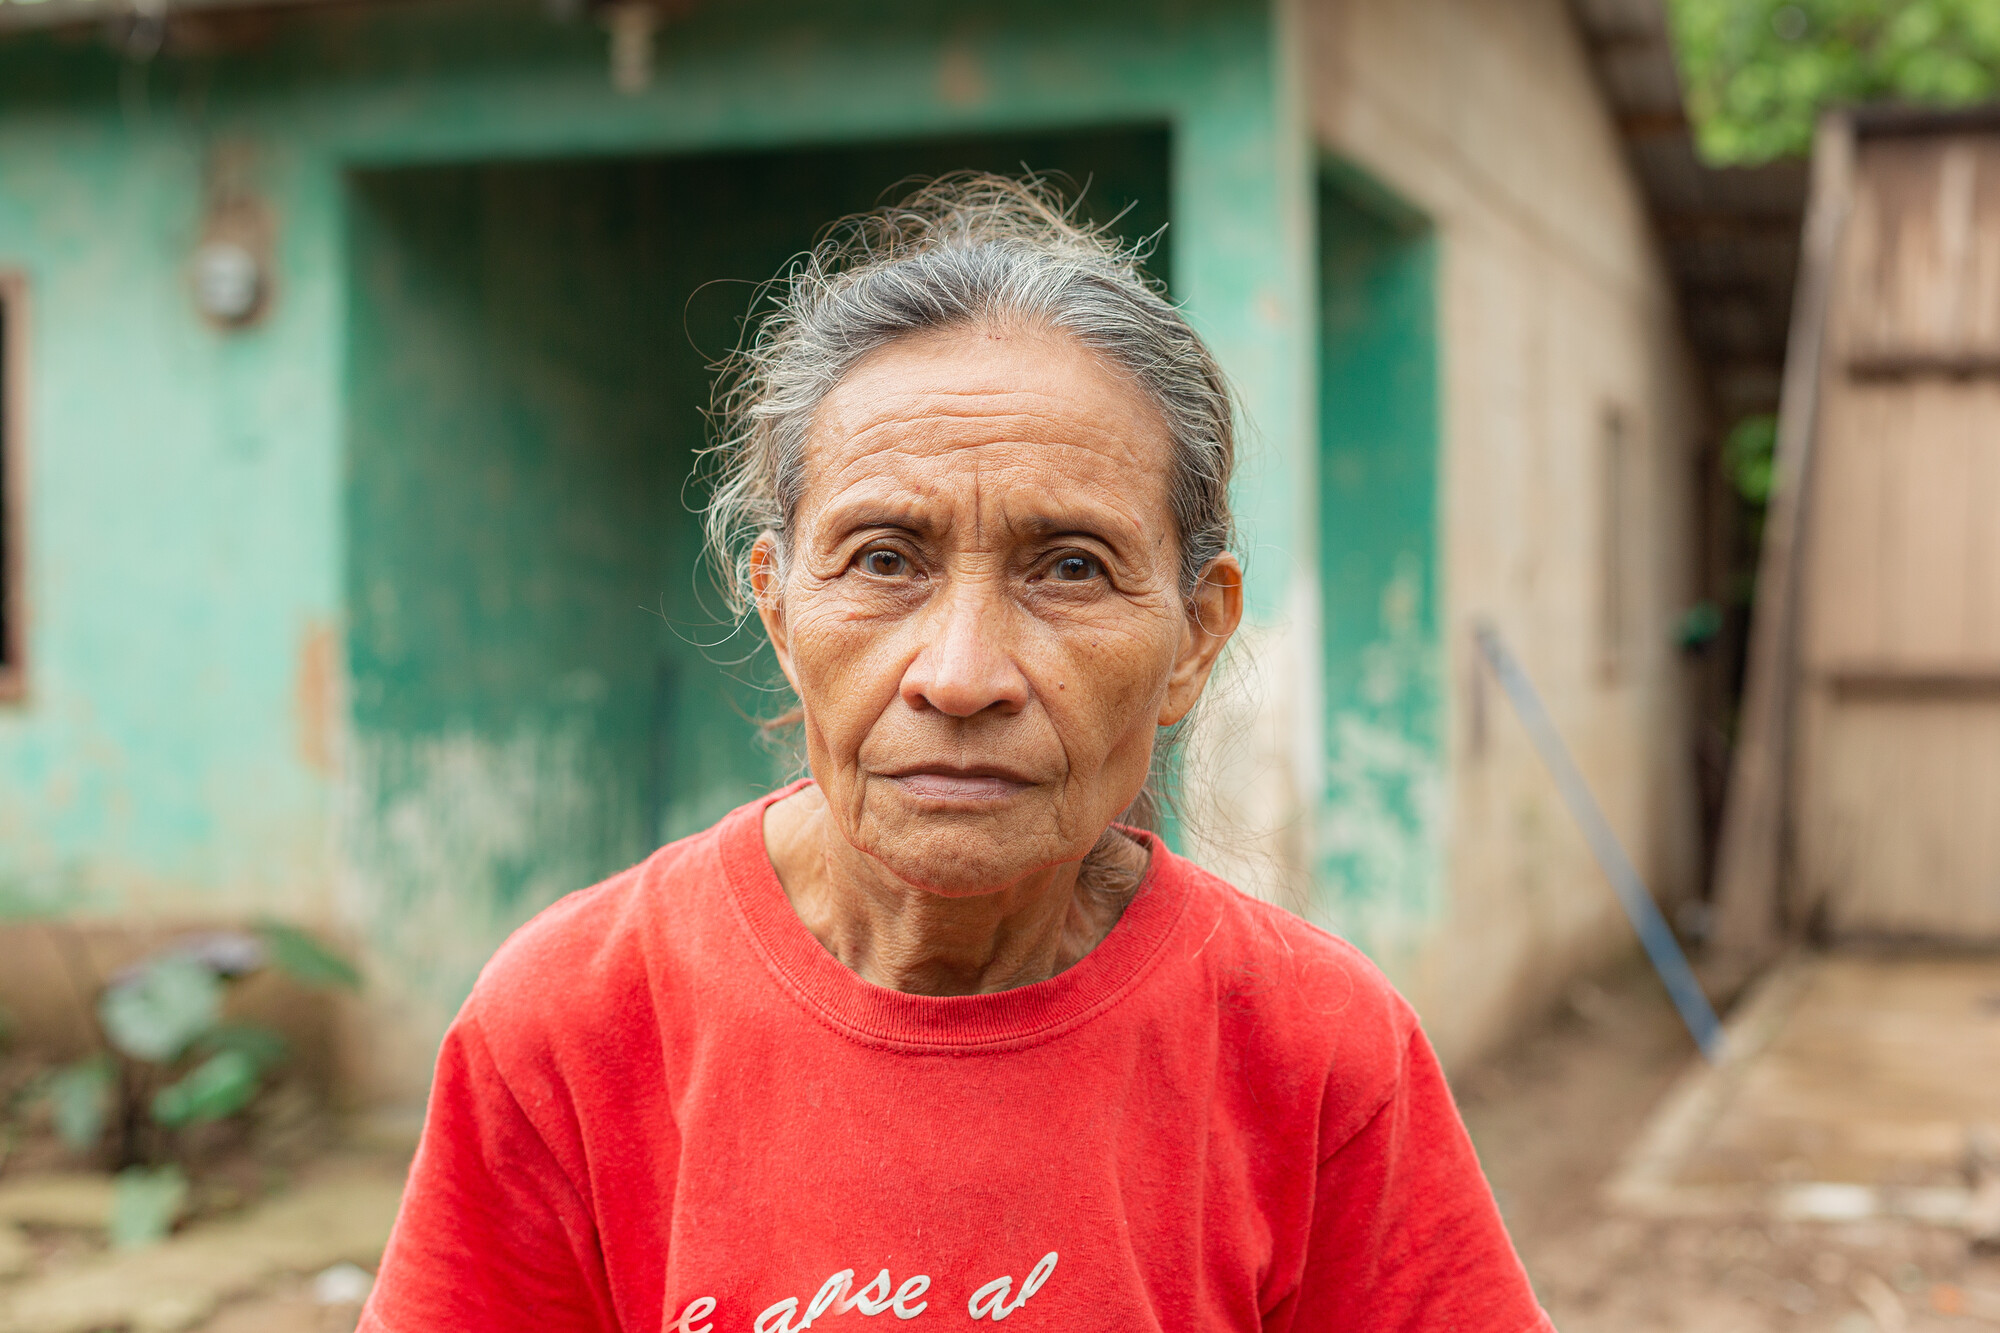 A older Honduran woman in a red shirt stands in front of a house